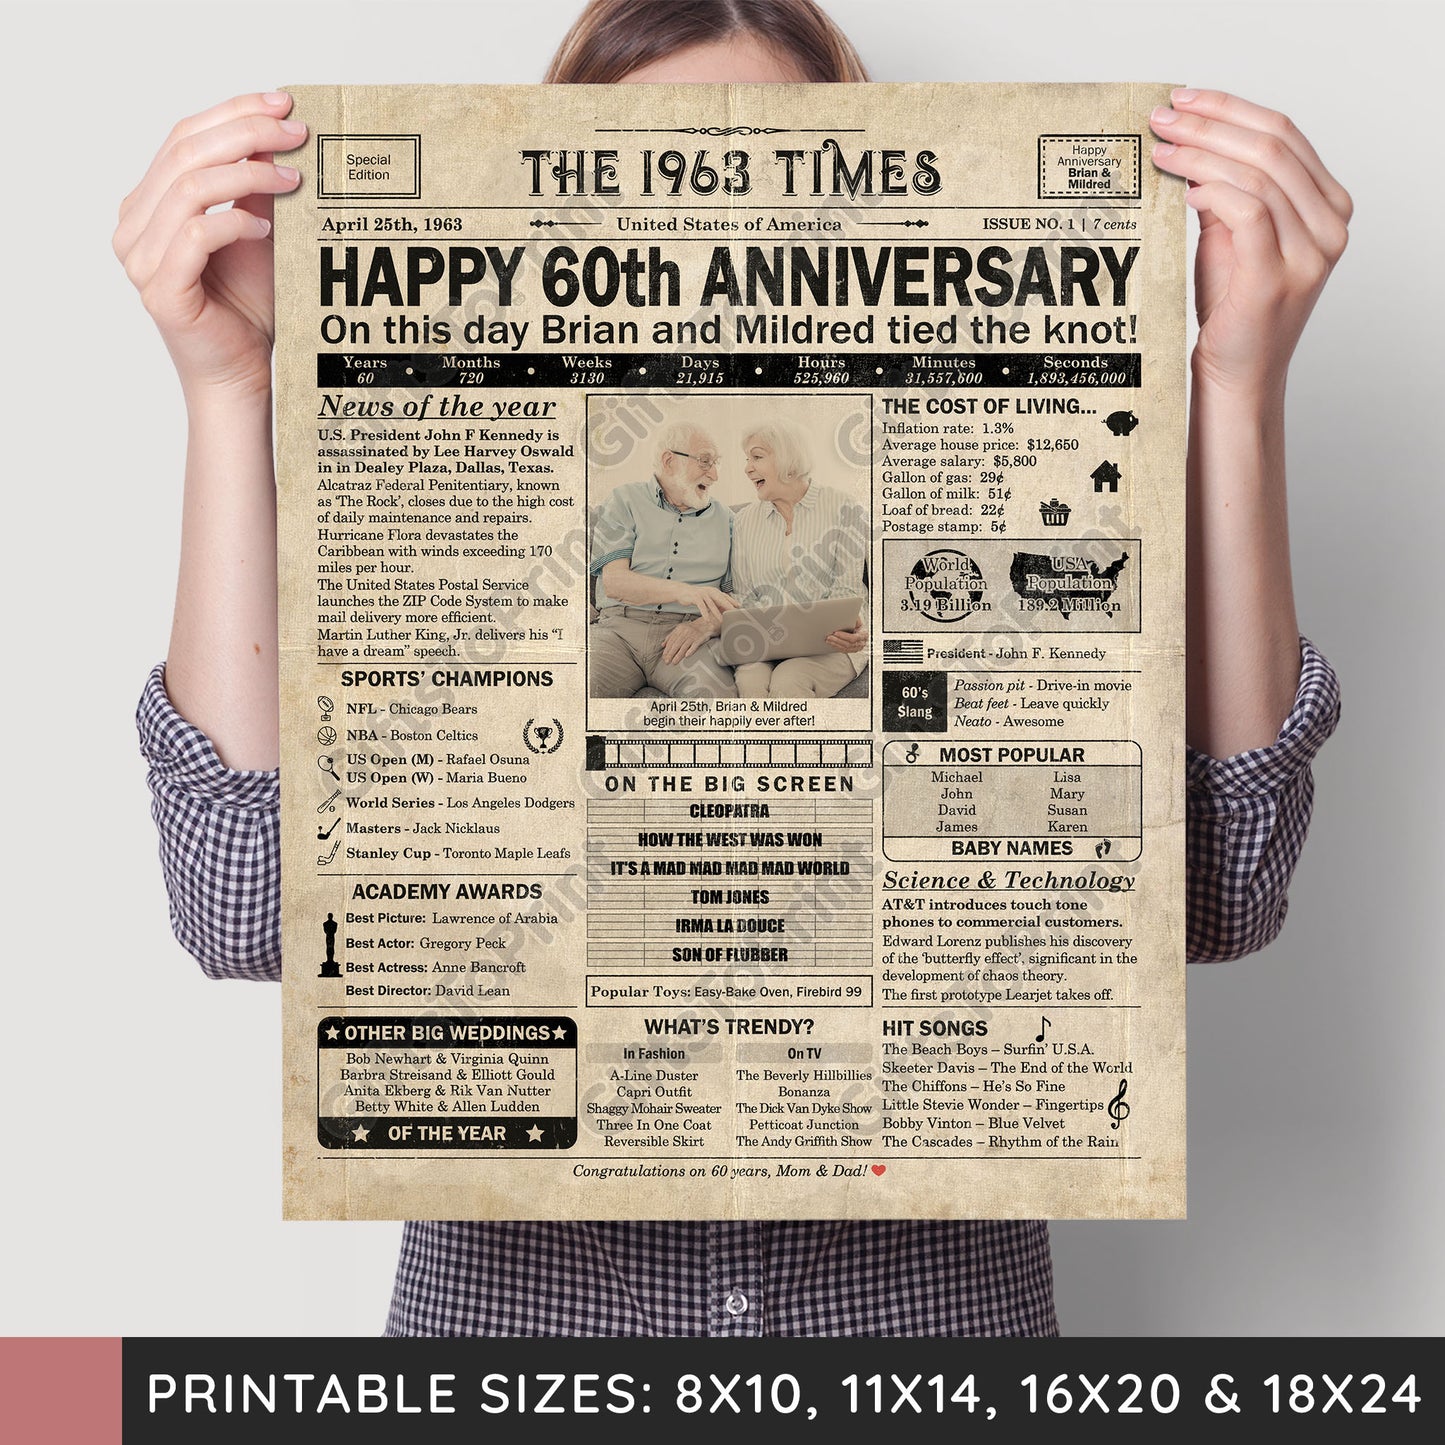 Personalized 60th Anniversary Gift: A Printable US Newspaper Poster of 1963